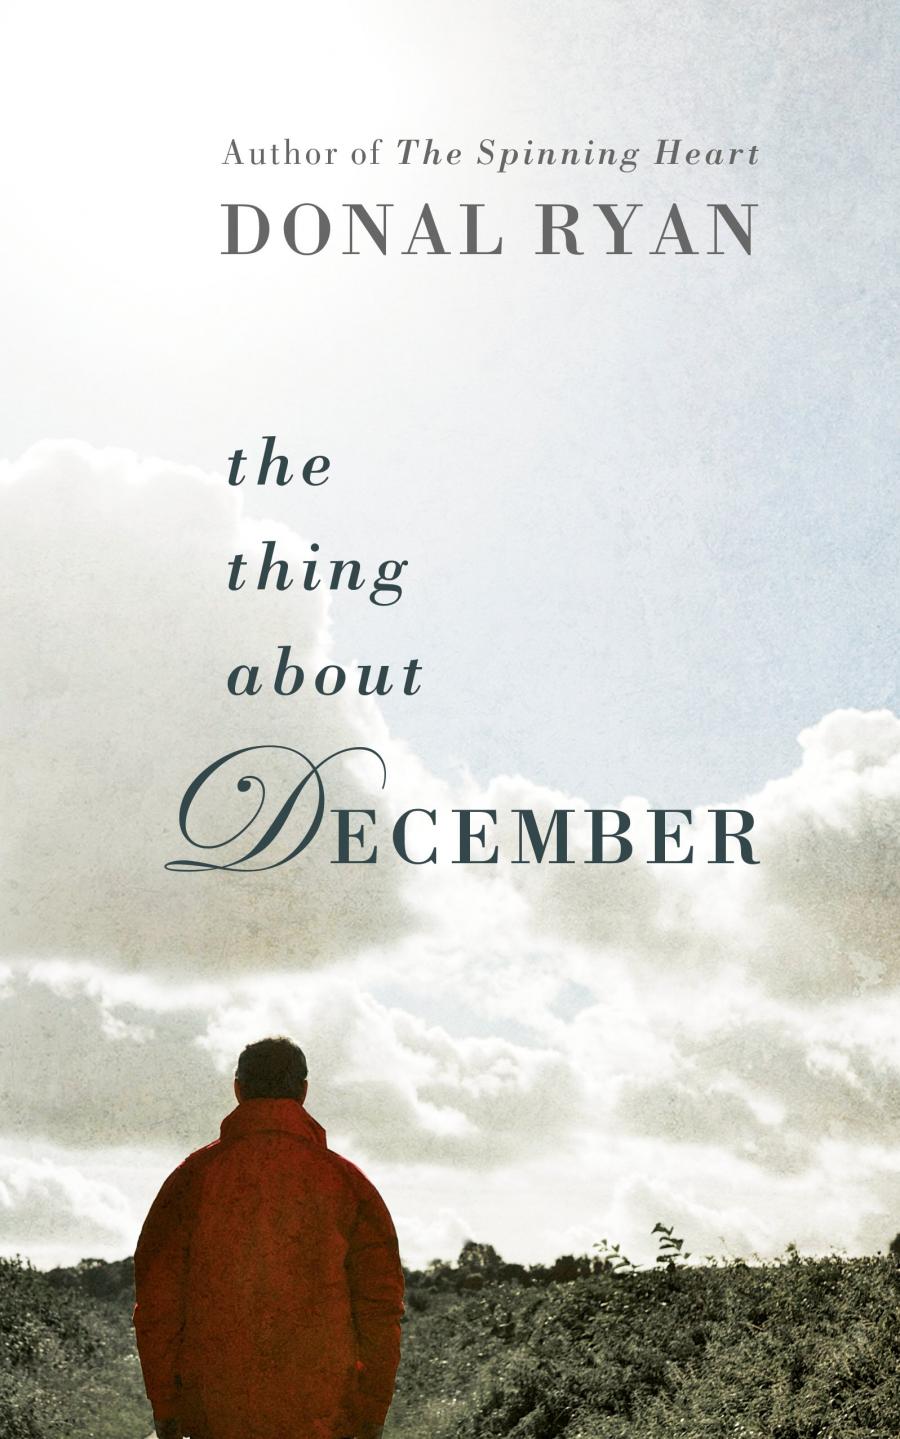 The thing about december